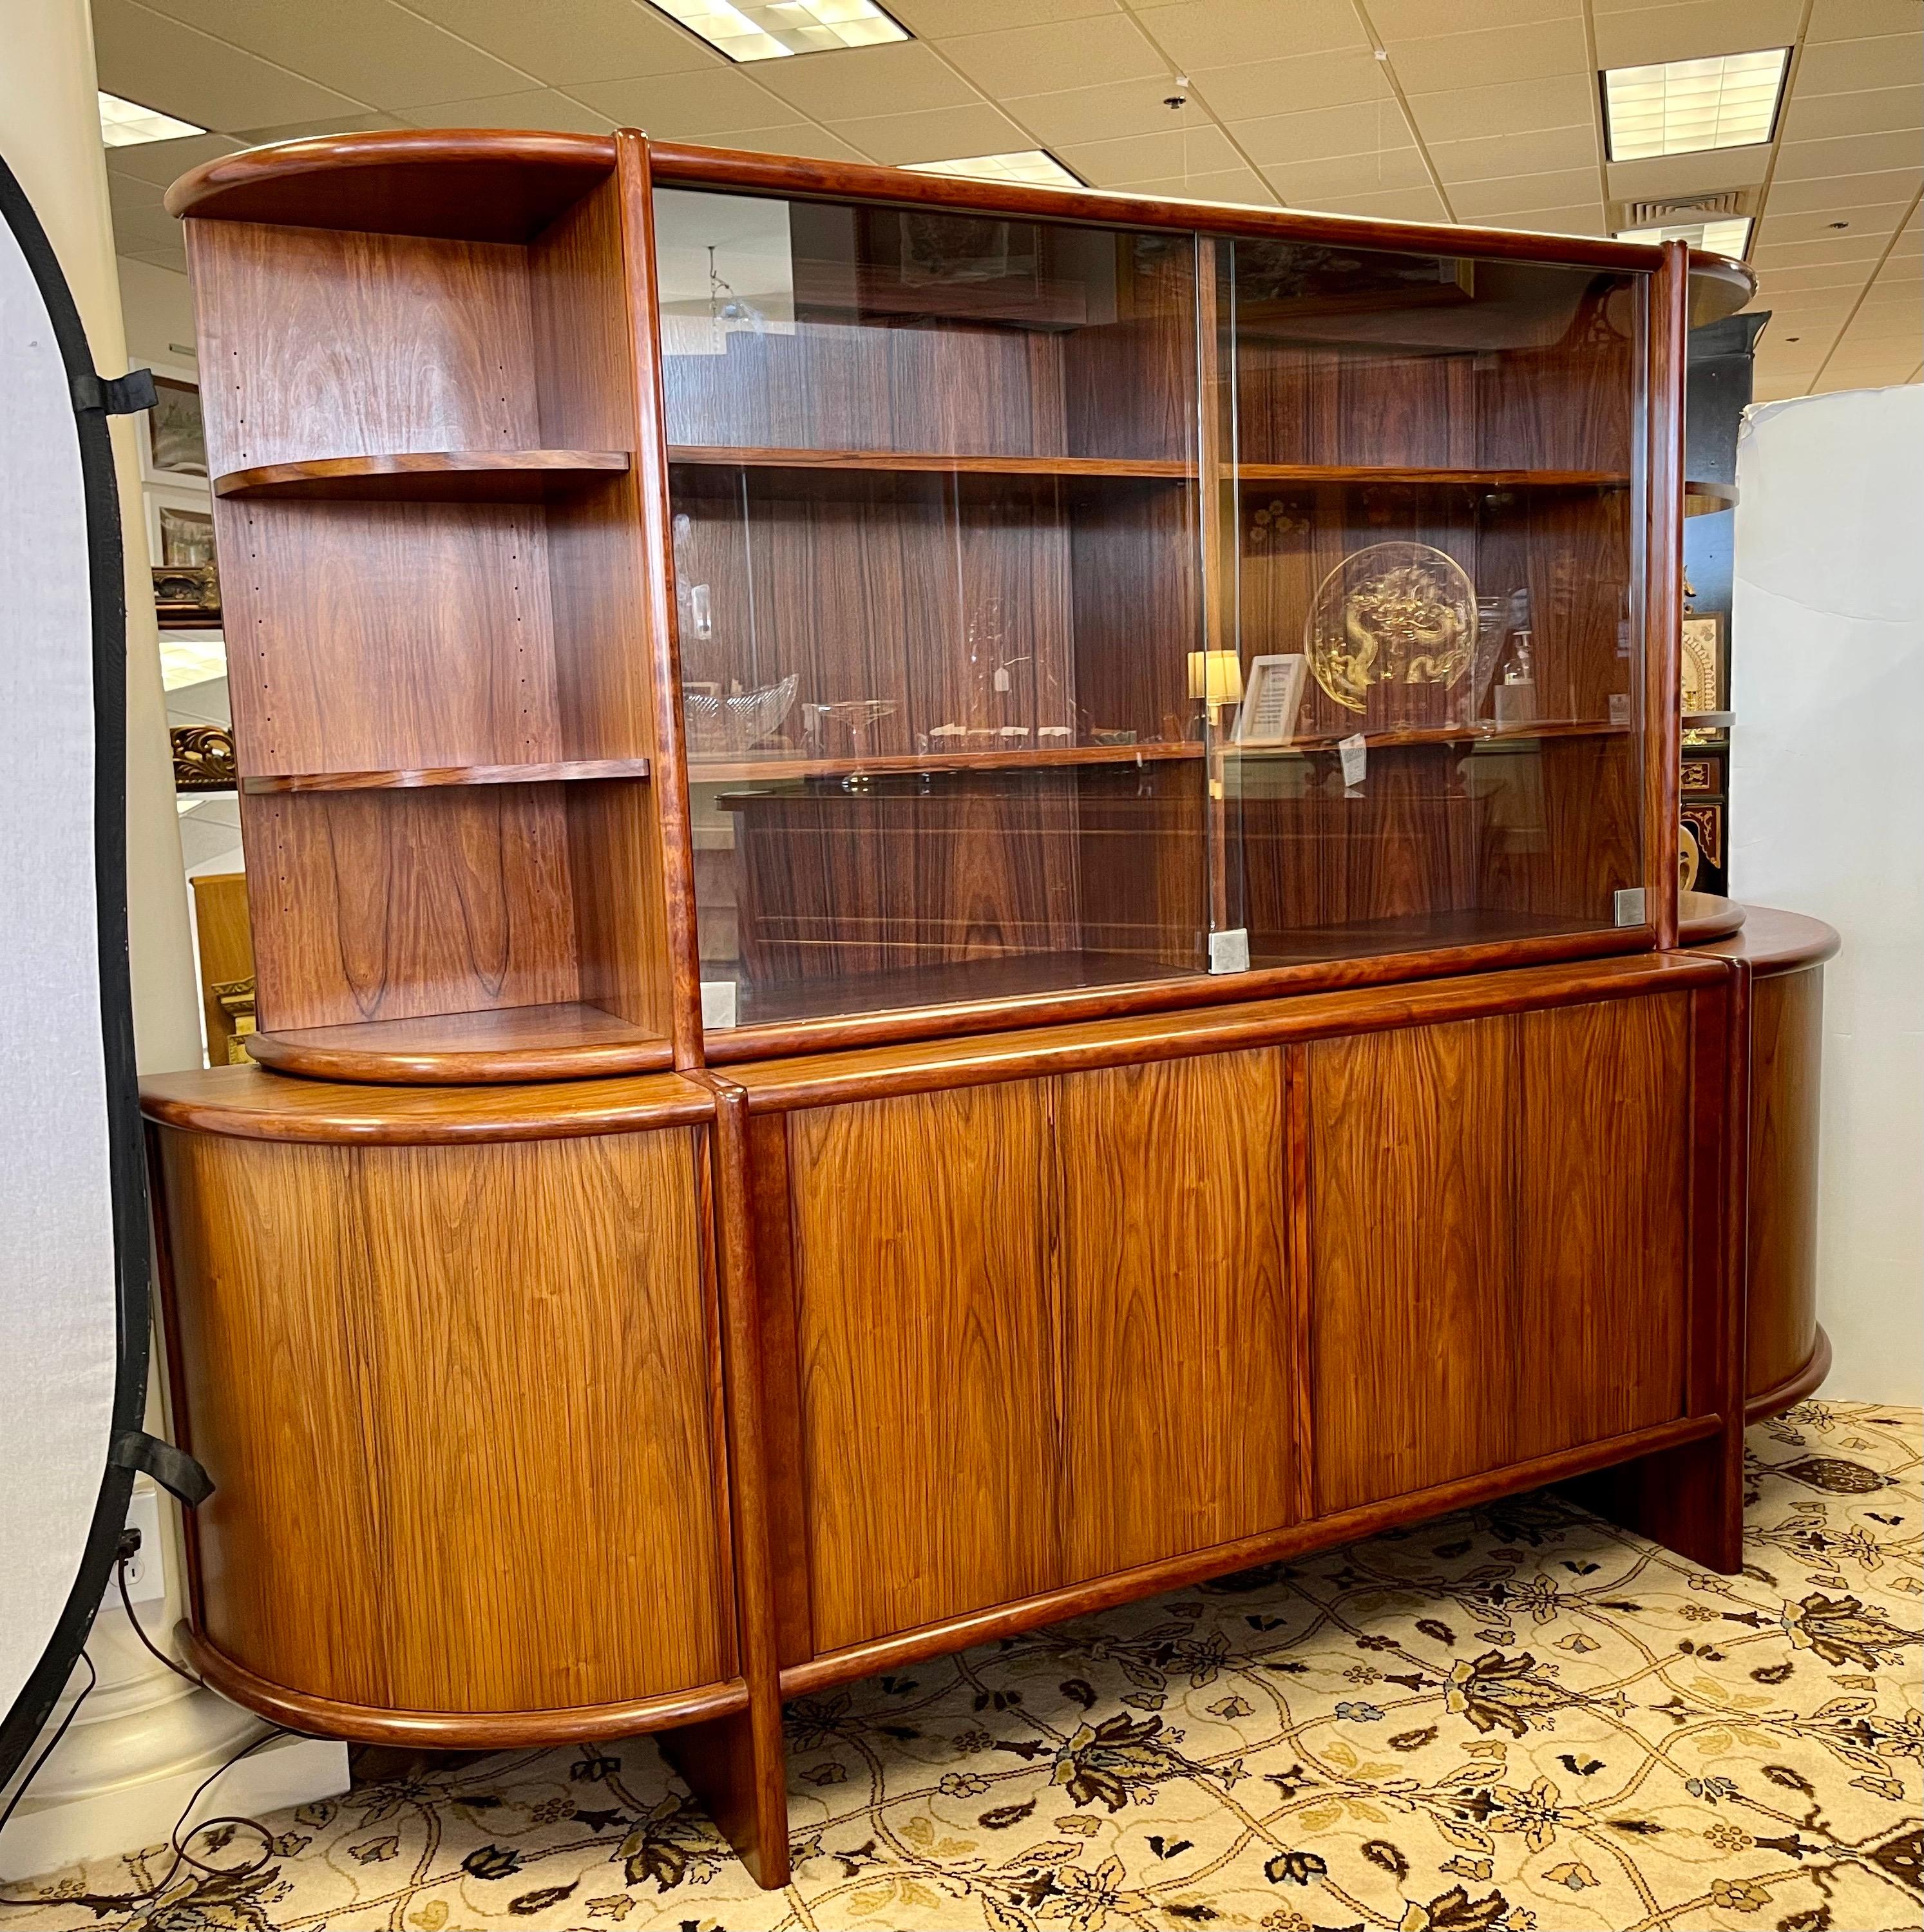 Stunning vintage Boltinge Danish modern 2 pc china cabinet credenza features upper portion with sliding glass doors and curved open shelving on the sides. Bottom credenza features sliding tambour doors that open to shelving and felt-lined drawers. A